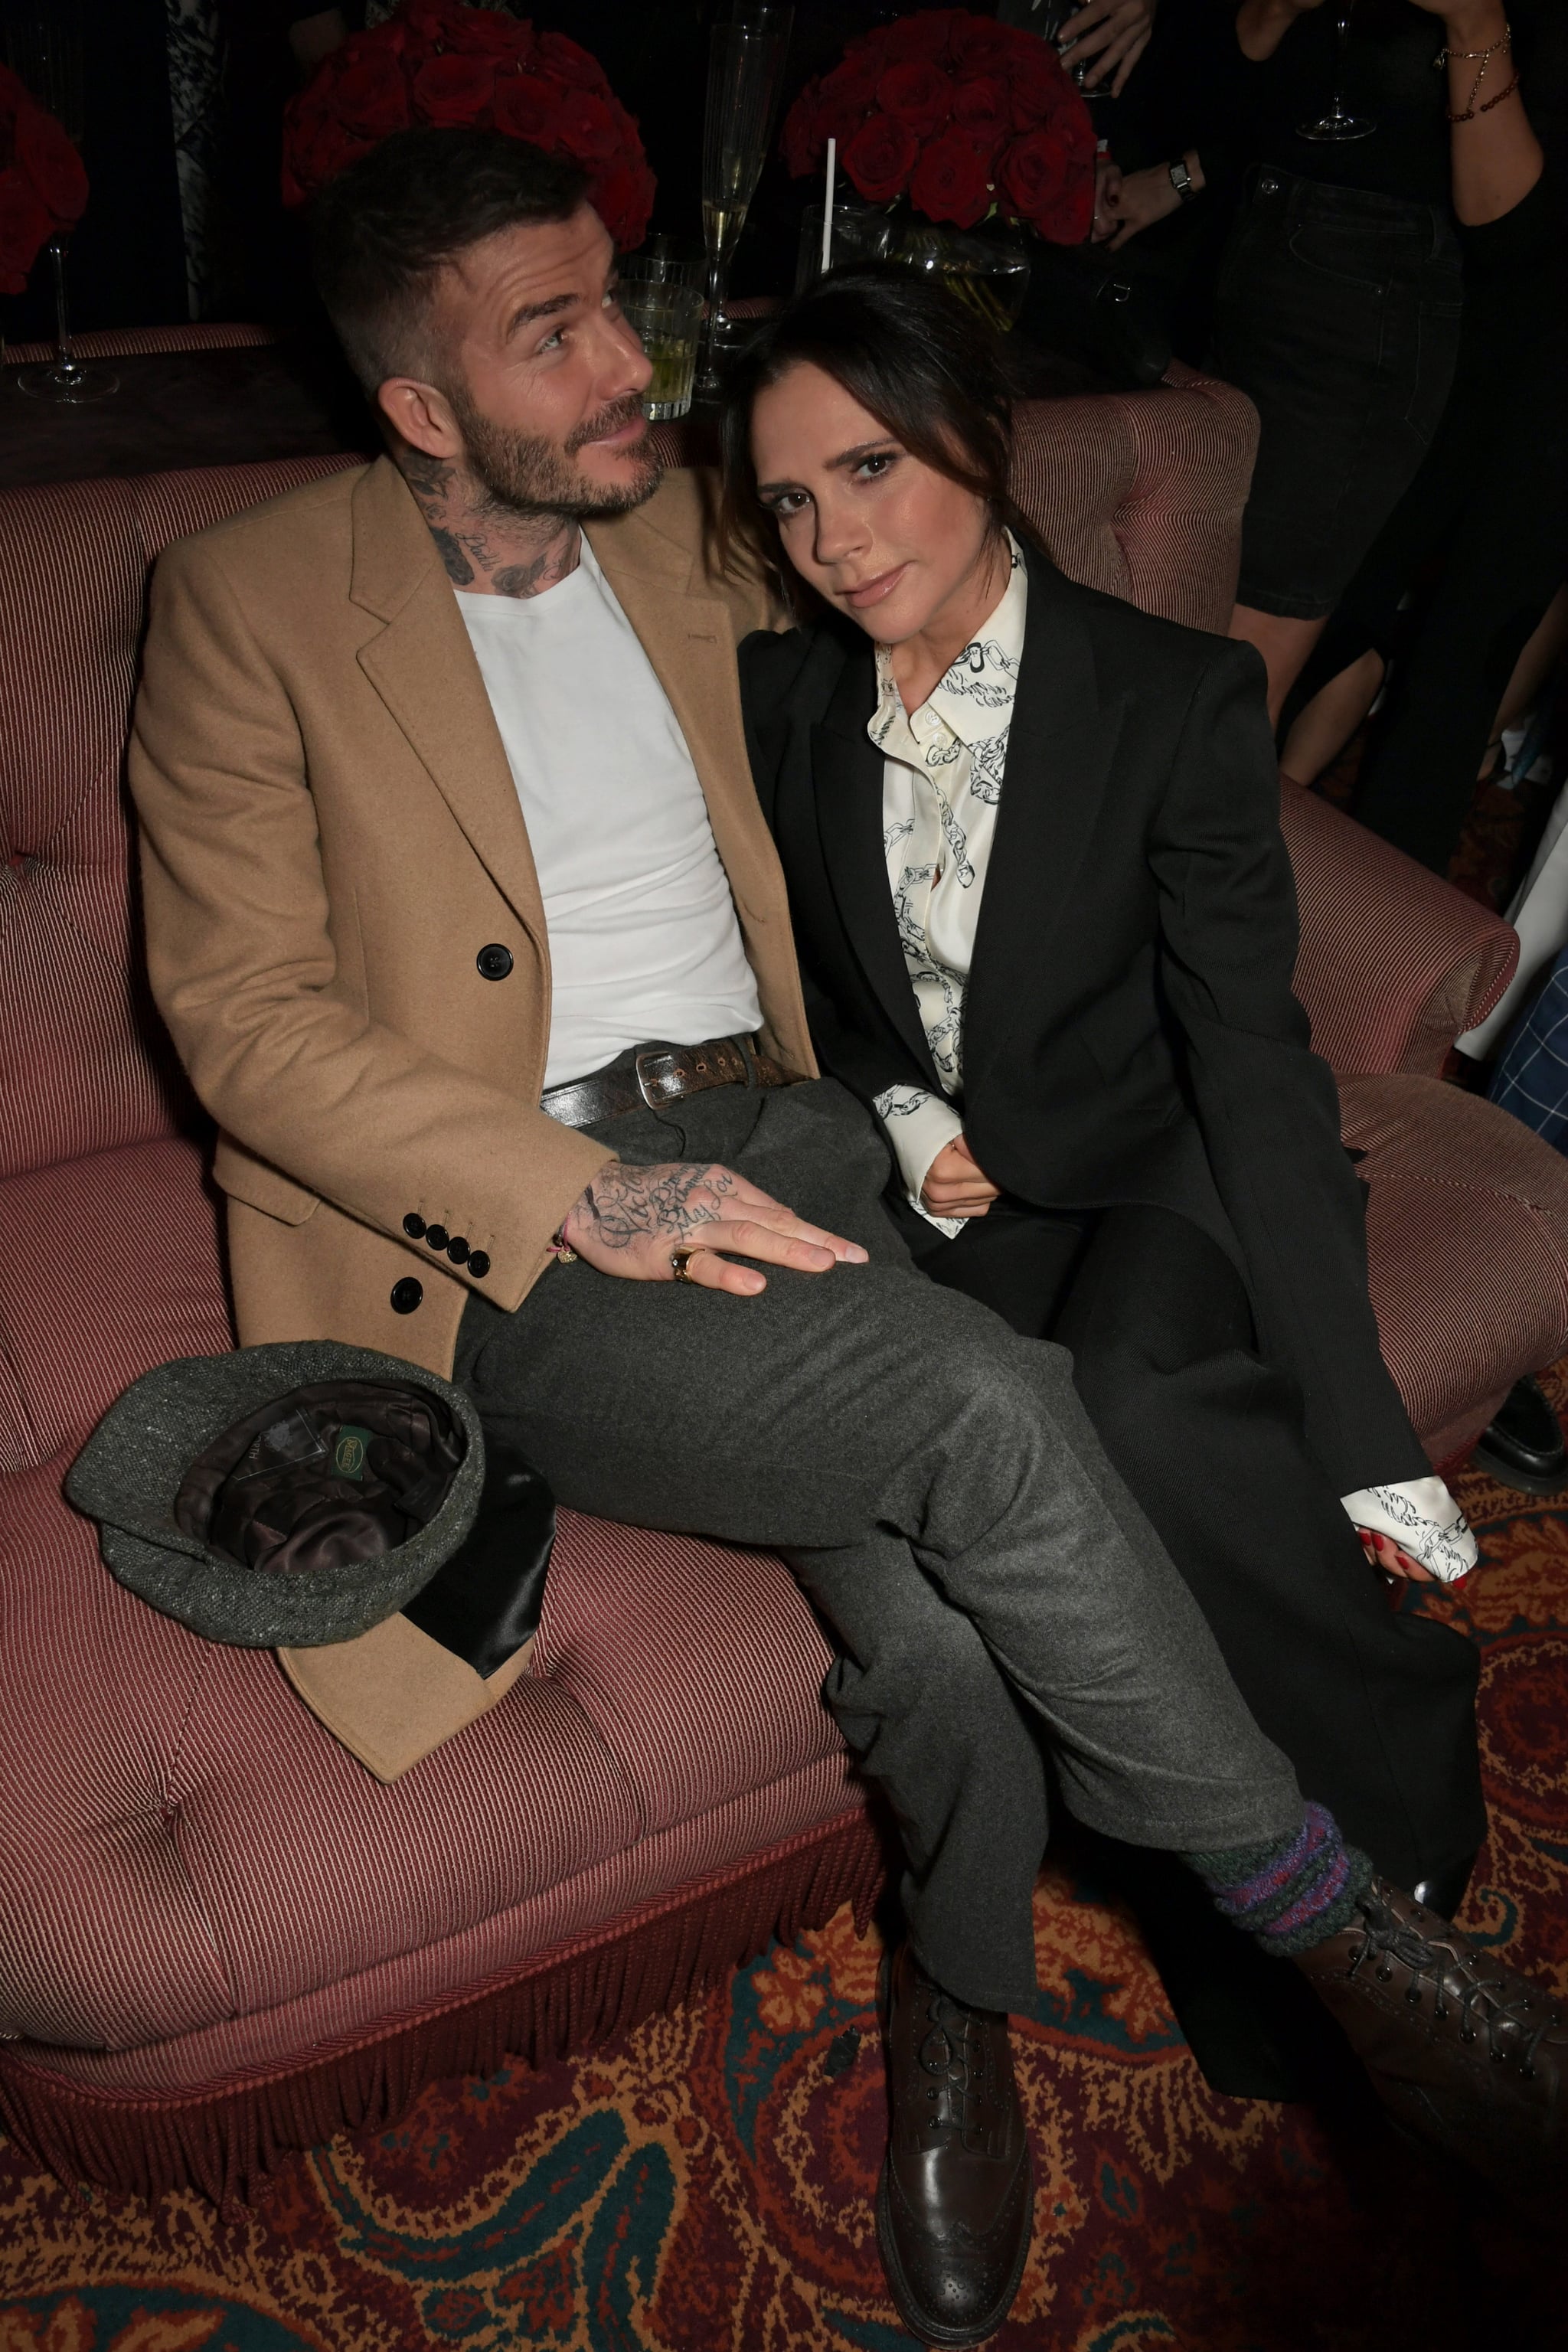 LONDON, ENGLAND - FEBRUARY 17:   David Beckham (L) and Victoria Beckham attend the Victoria Beckham x YouTube Fashion & Beauty after party at London Fashion Week hosted by Derek Blasberg & David Beckham at Mark's Club on February 17, 2019 in London, England.  (Photo by David M. Benett/Dave Benett/Getty Images for YouTube)